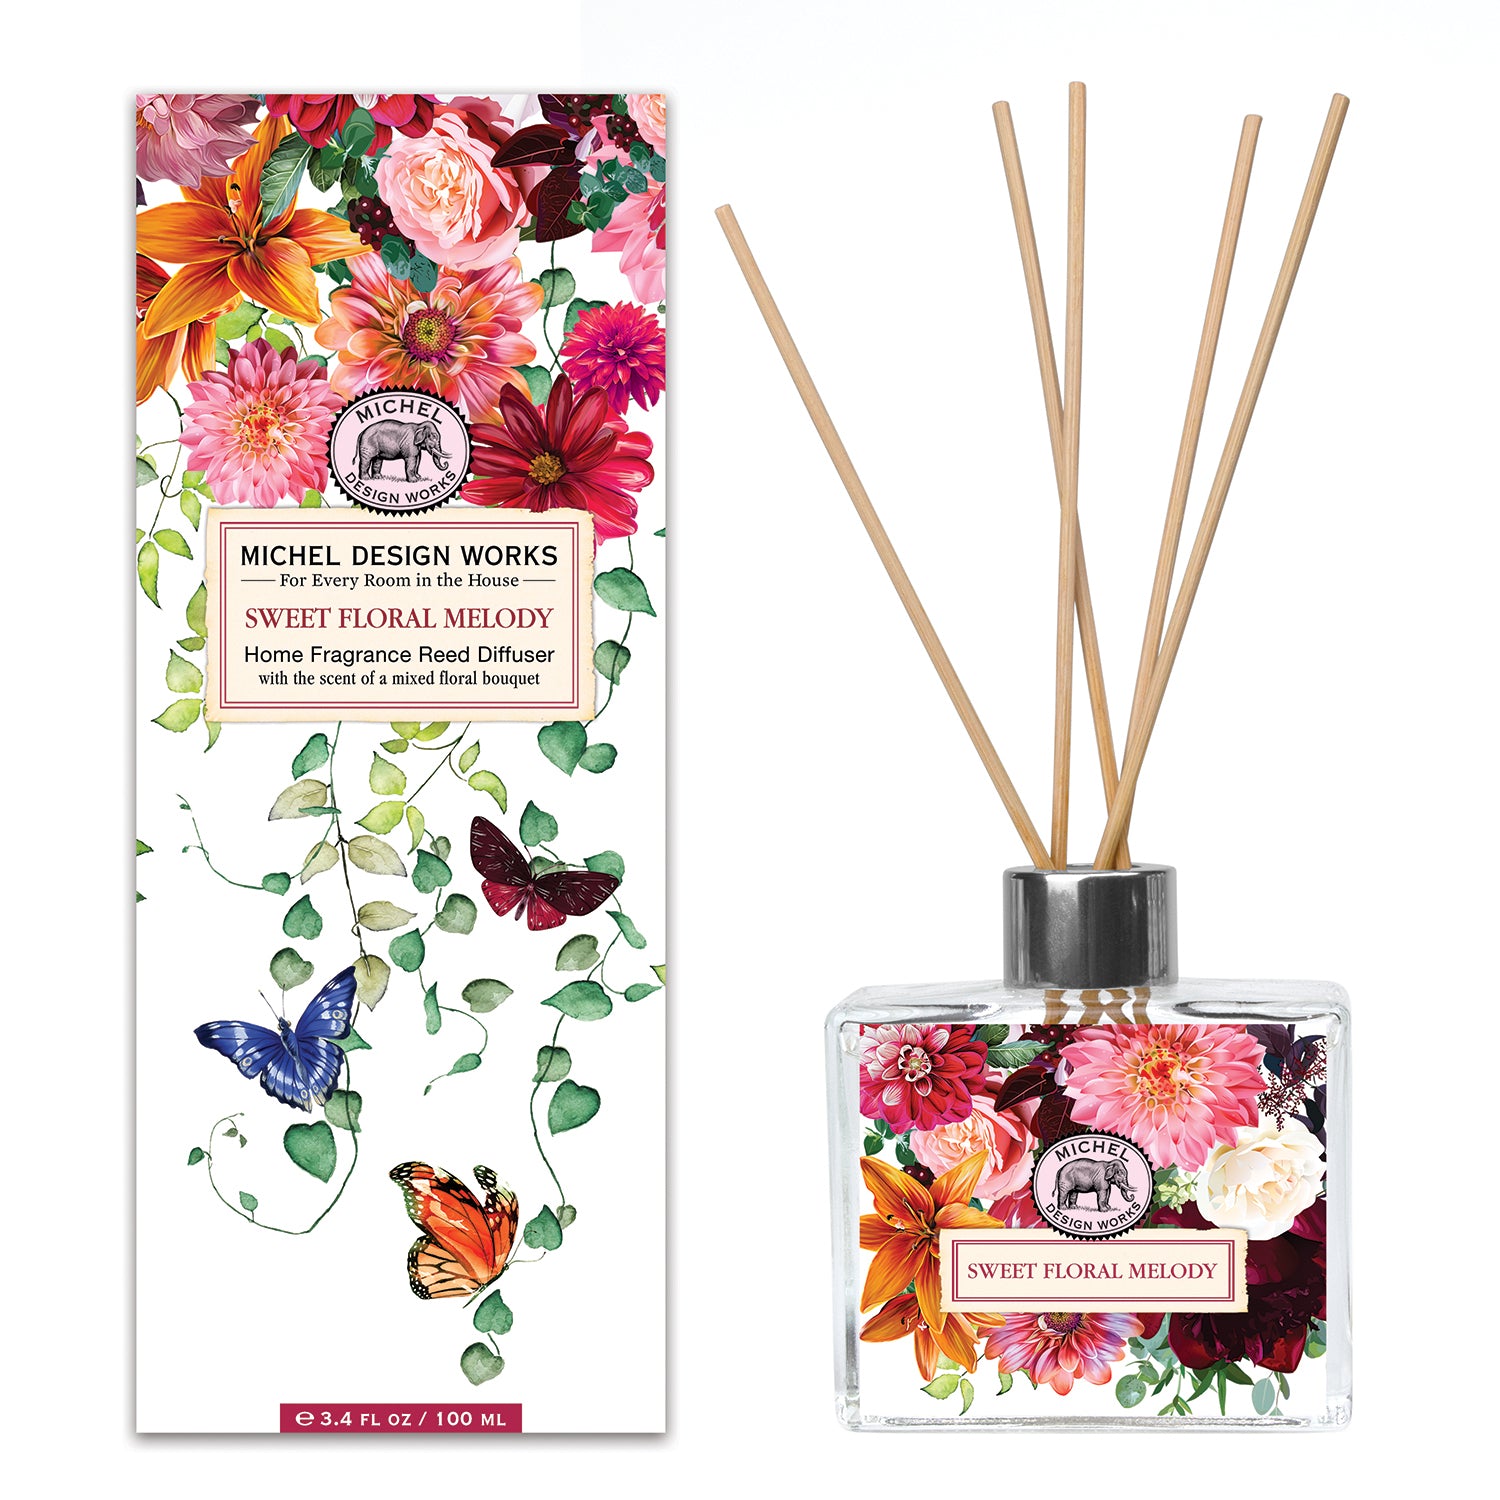 Michel Design Works - Sweet Floral Melody (Reed Diffuser)